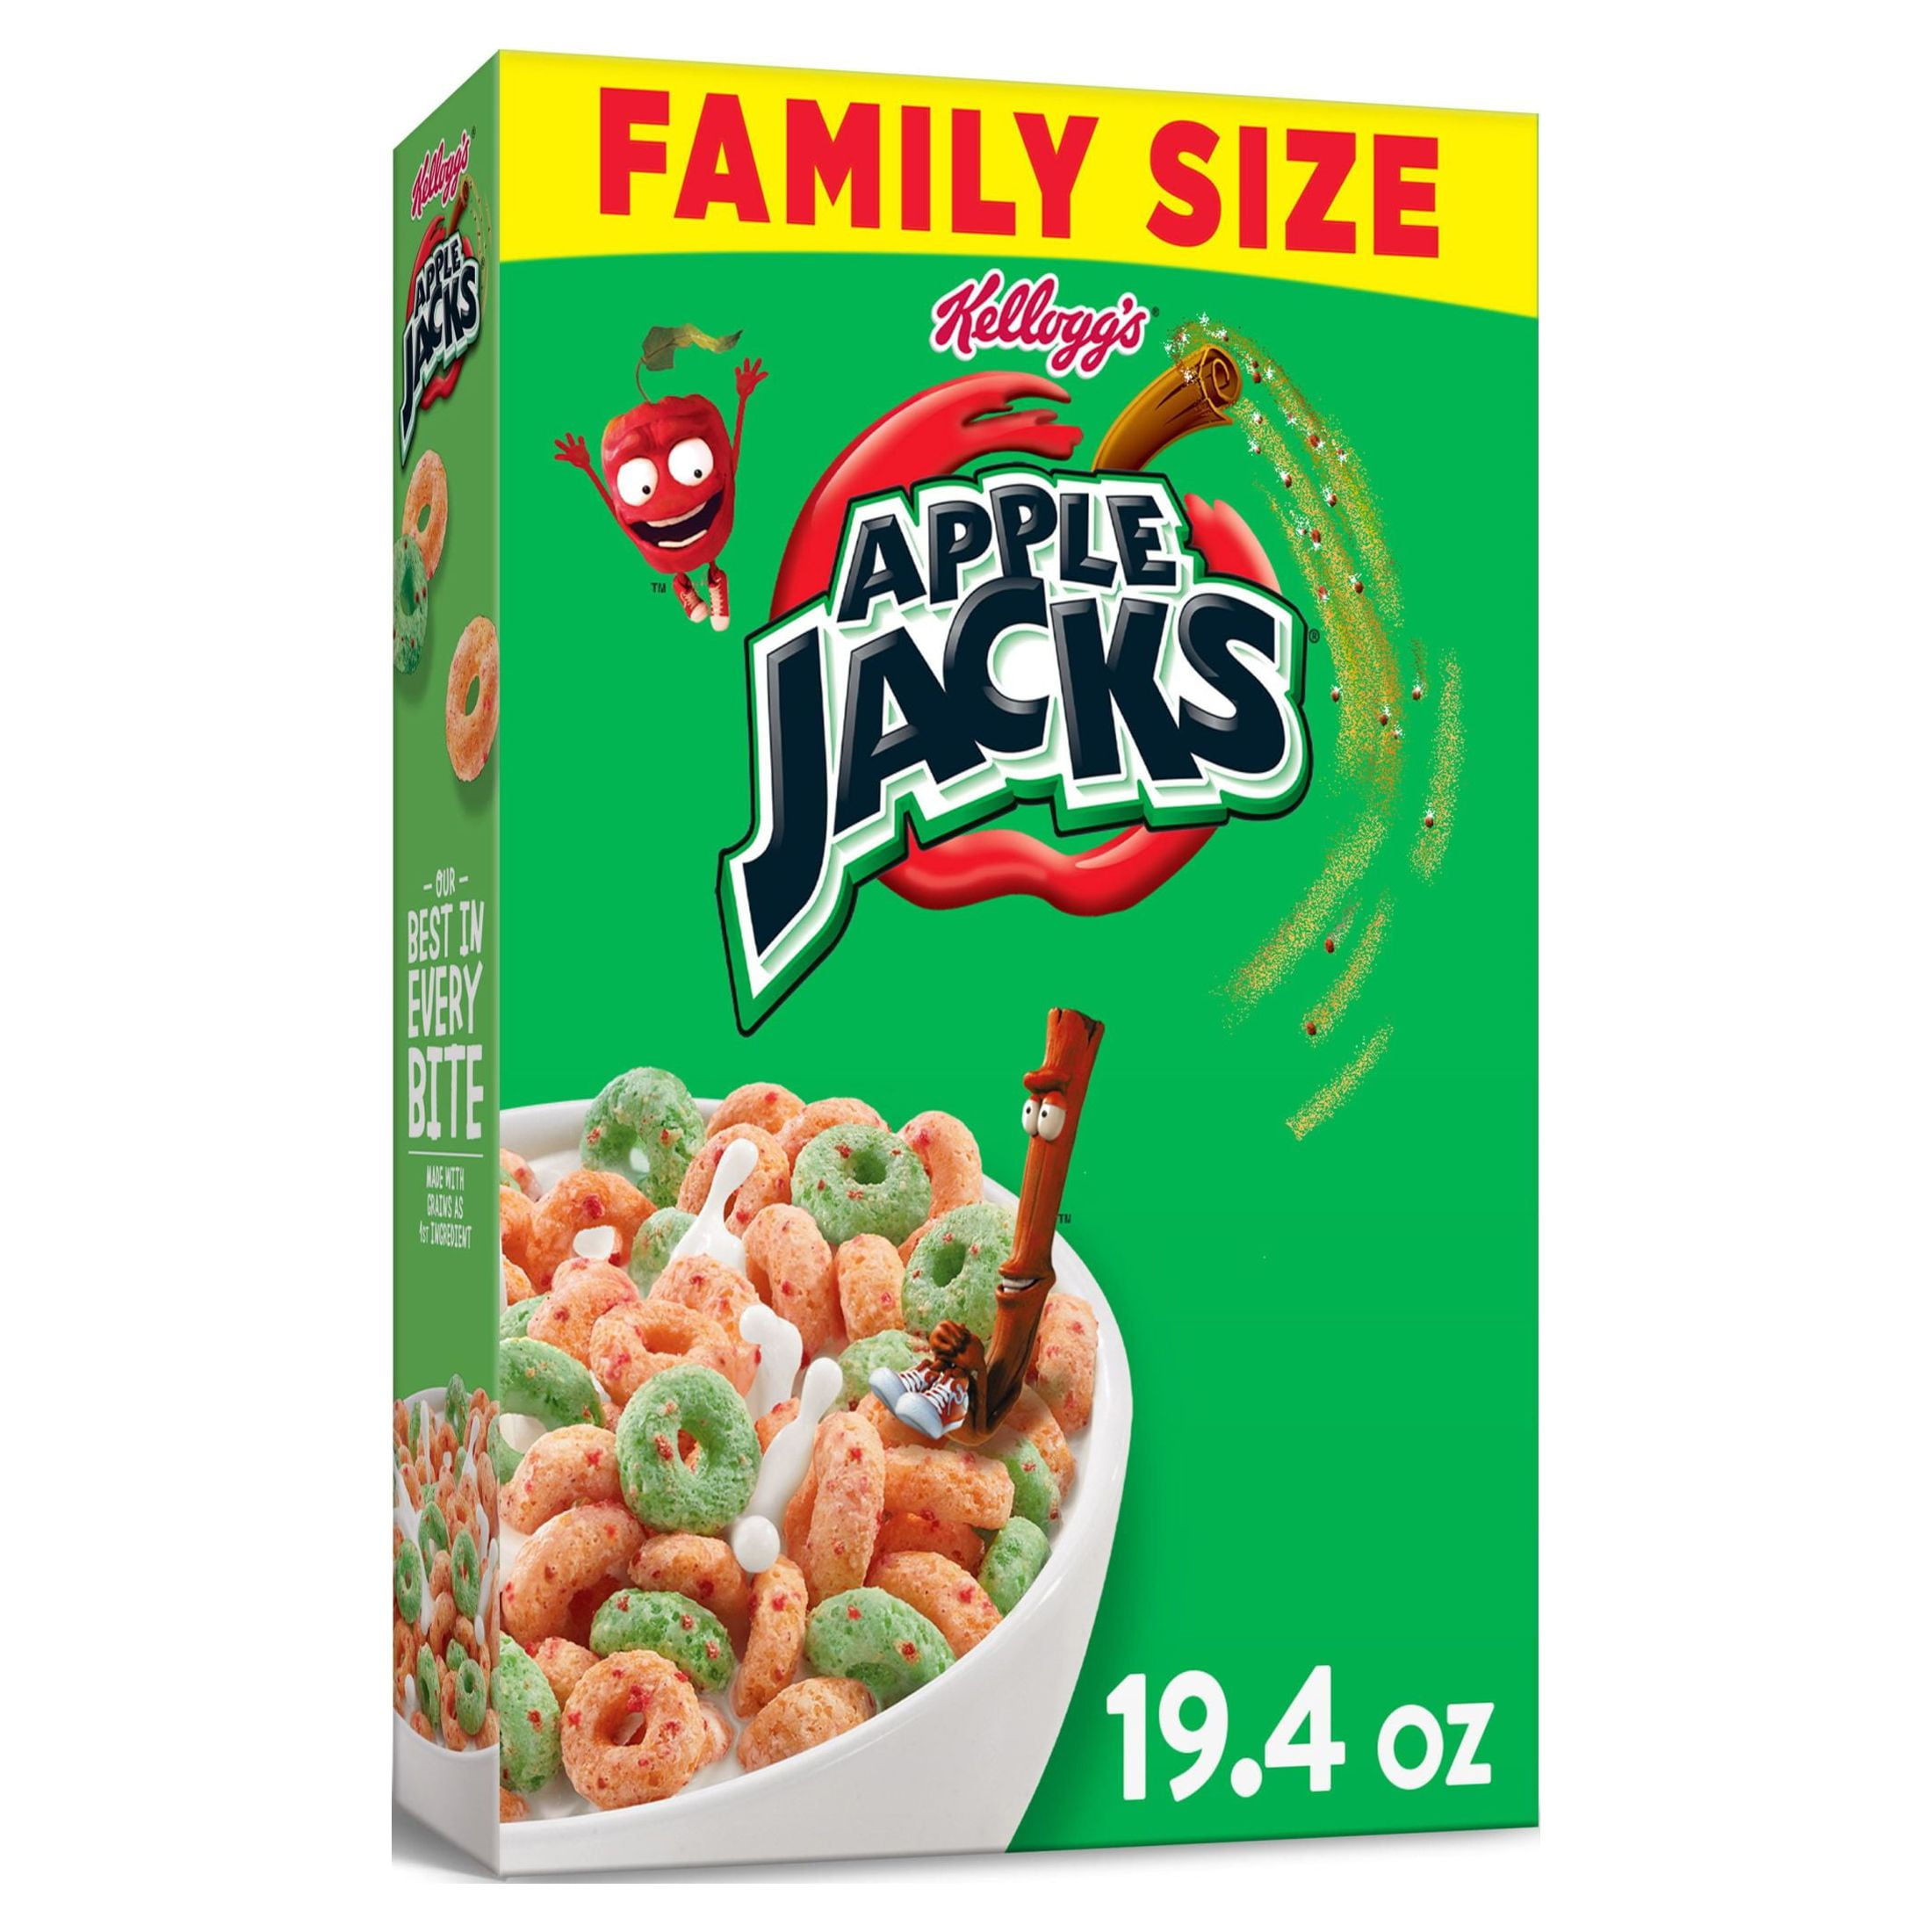 NEW KELLOGG'S FAMILY SIZE FROOT LOOPS CEREAL 19.4 OZ BOX